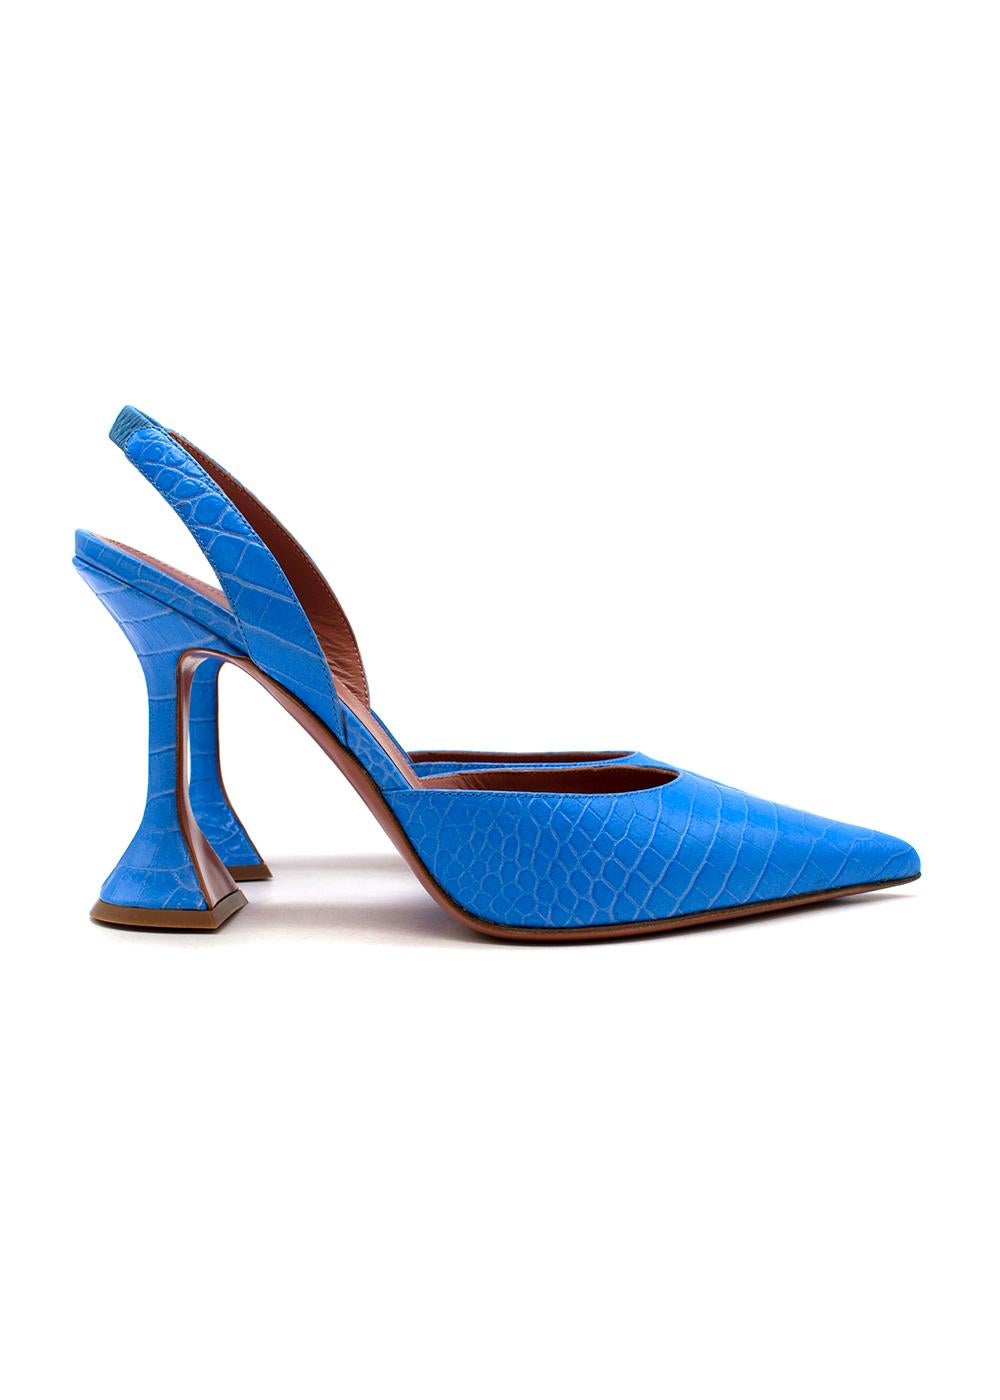 Amina Muaddi bright blue croc embossed leather Holli slingback heeled pumps

- Vivid, cornflower blue croc-effect leather body
- Sharply pointed toe contrasted with a d'Orsay slingback strap
- Set on the iconic martini-glass shaped stiletto heel
-